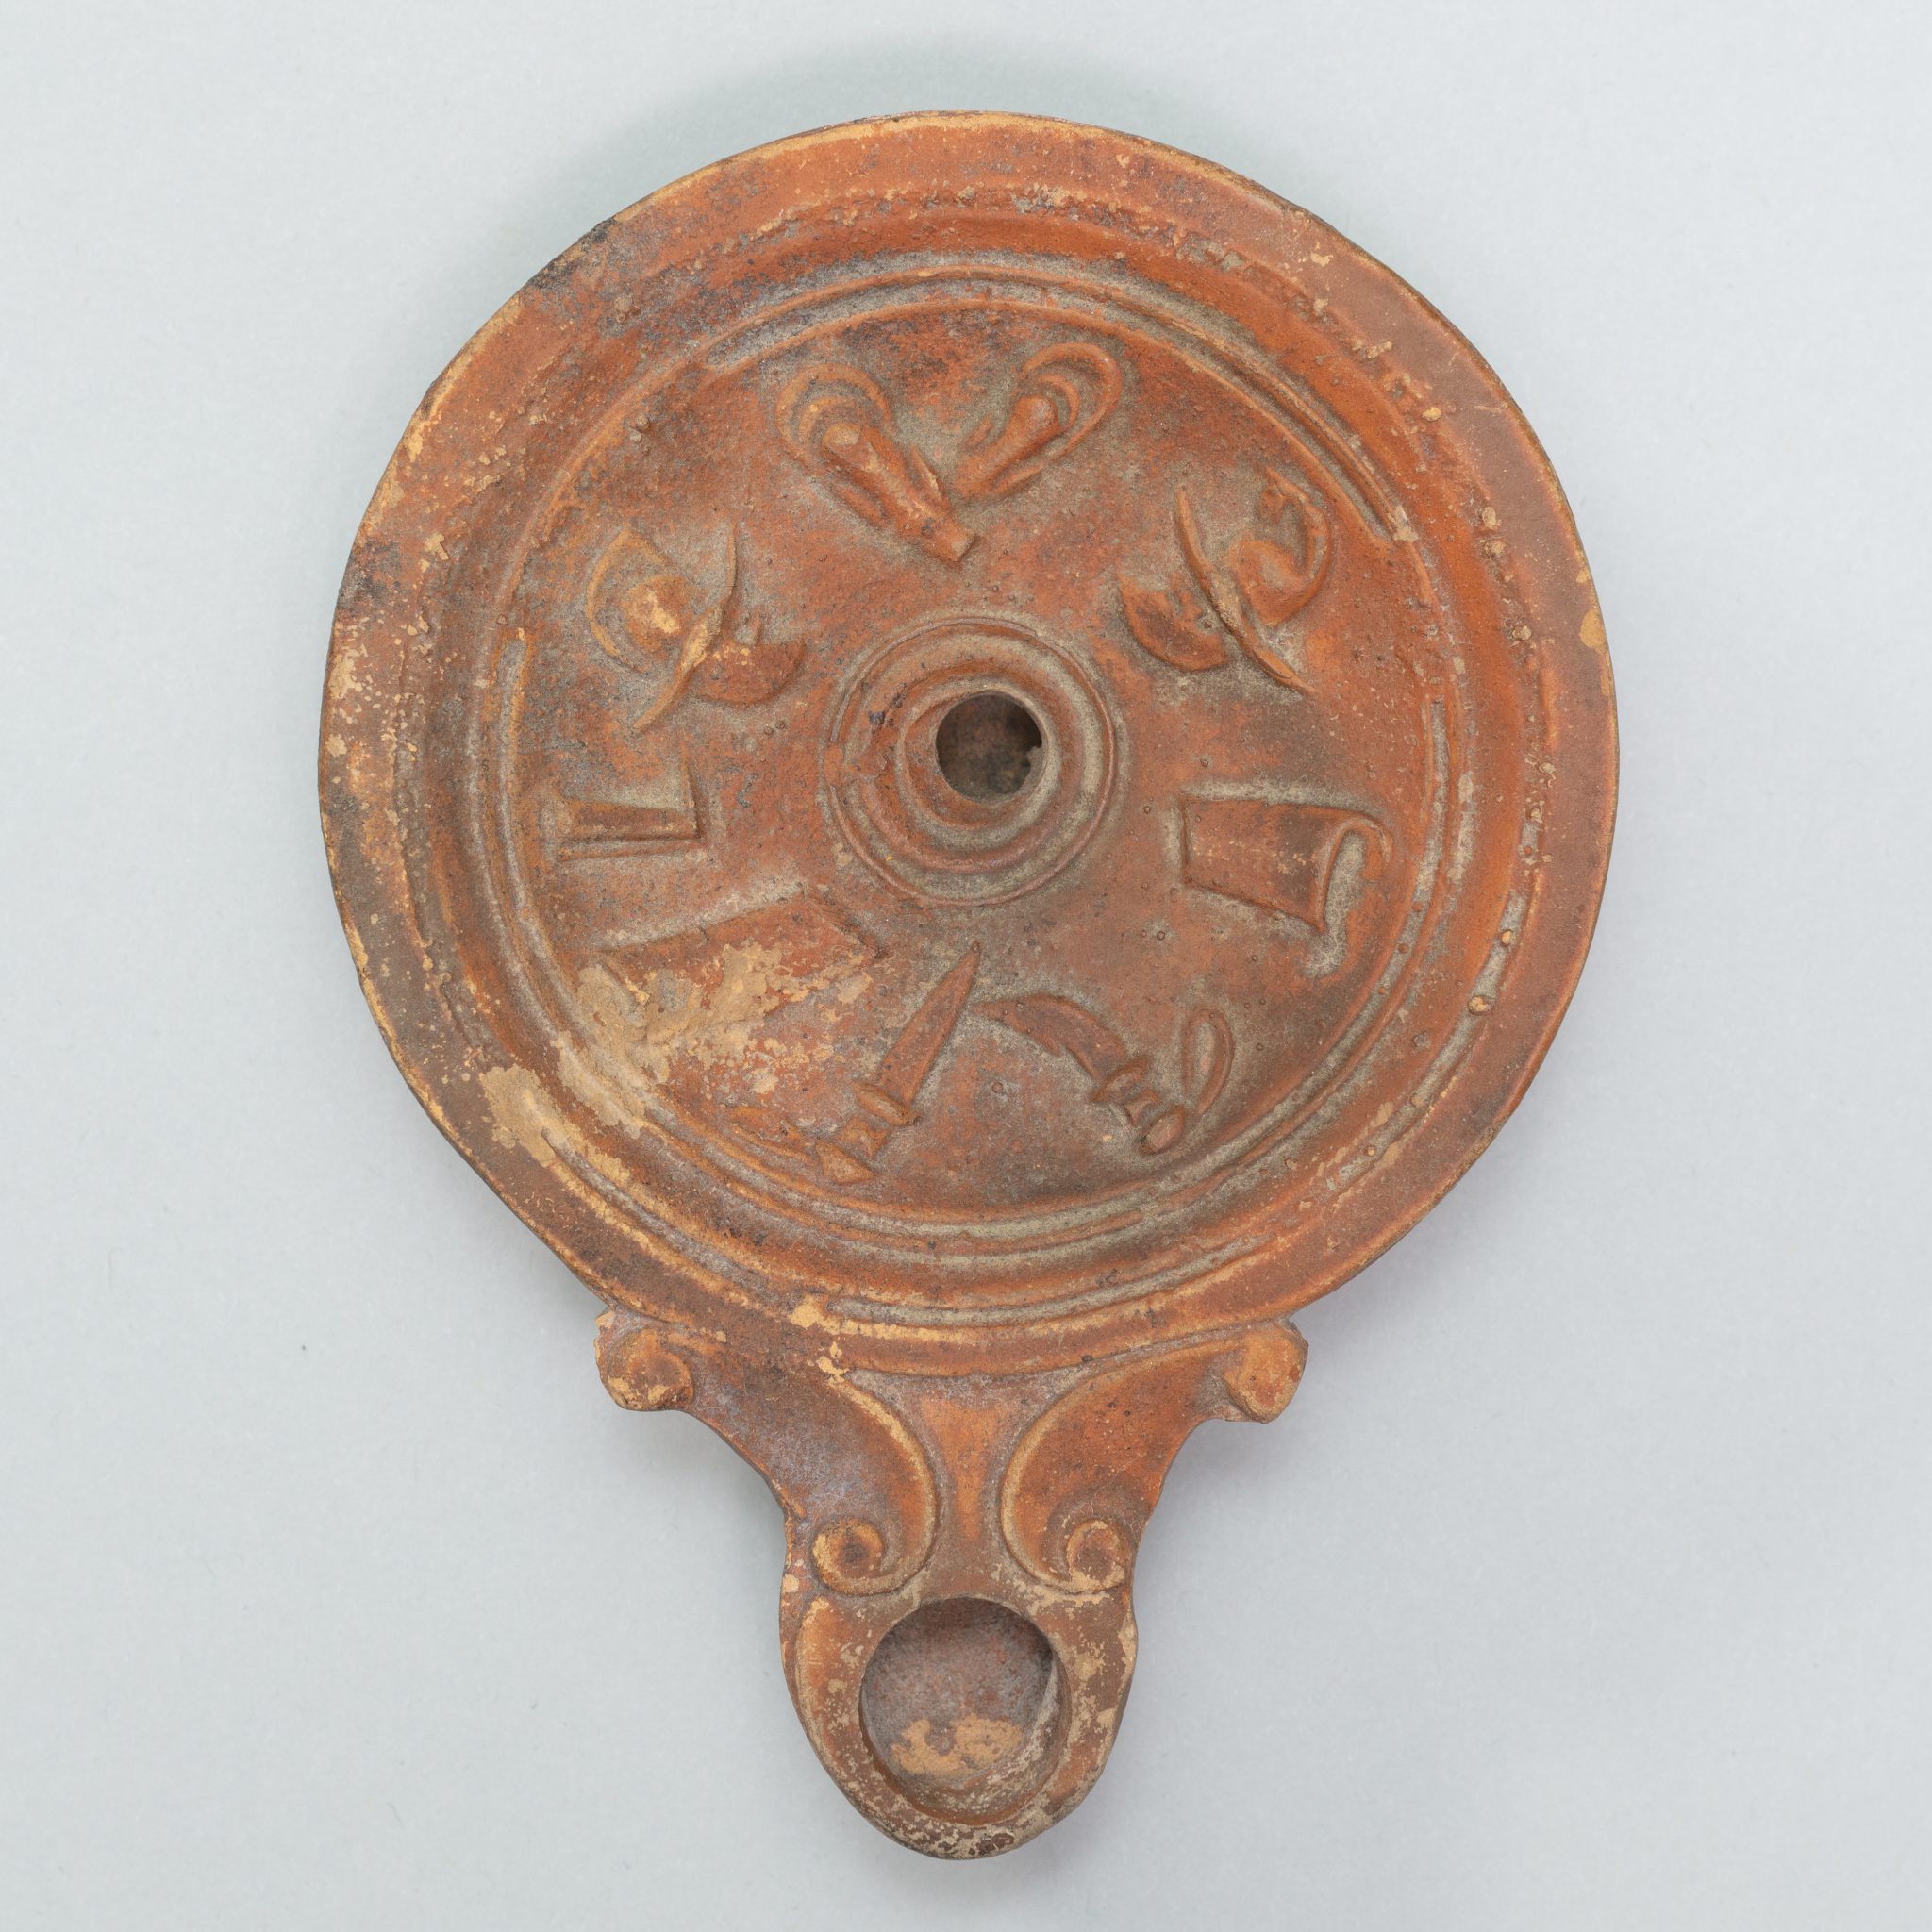 Circular terracotta lamp with gladiatorial weapons carved in a circle on its surface.